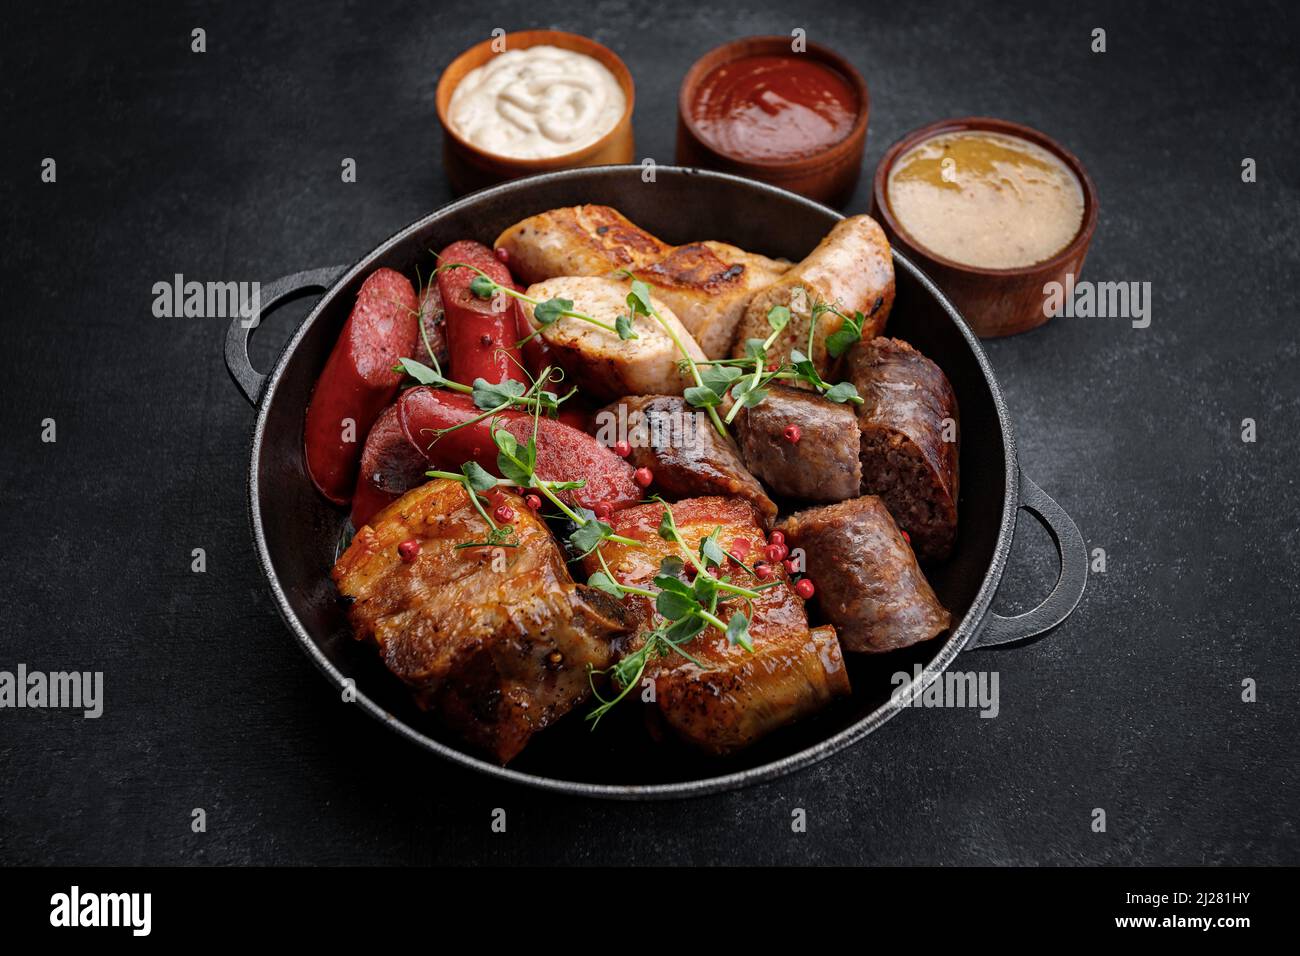 https://c8.alamy.com/comp/2J281HY/meat-fried-platter-in-a-pan-and-sauces-sausages-ribs-chicken-sausage-pork-sausage-on-a-black-background-2J281HY.jpg